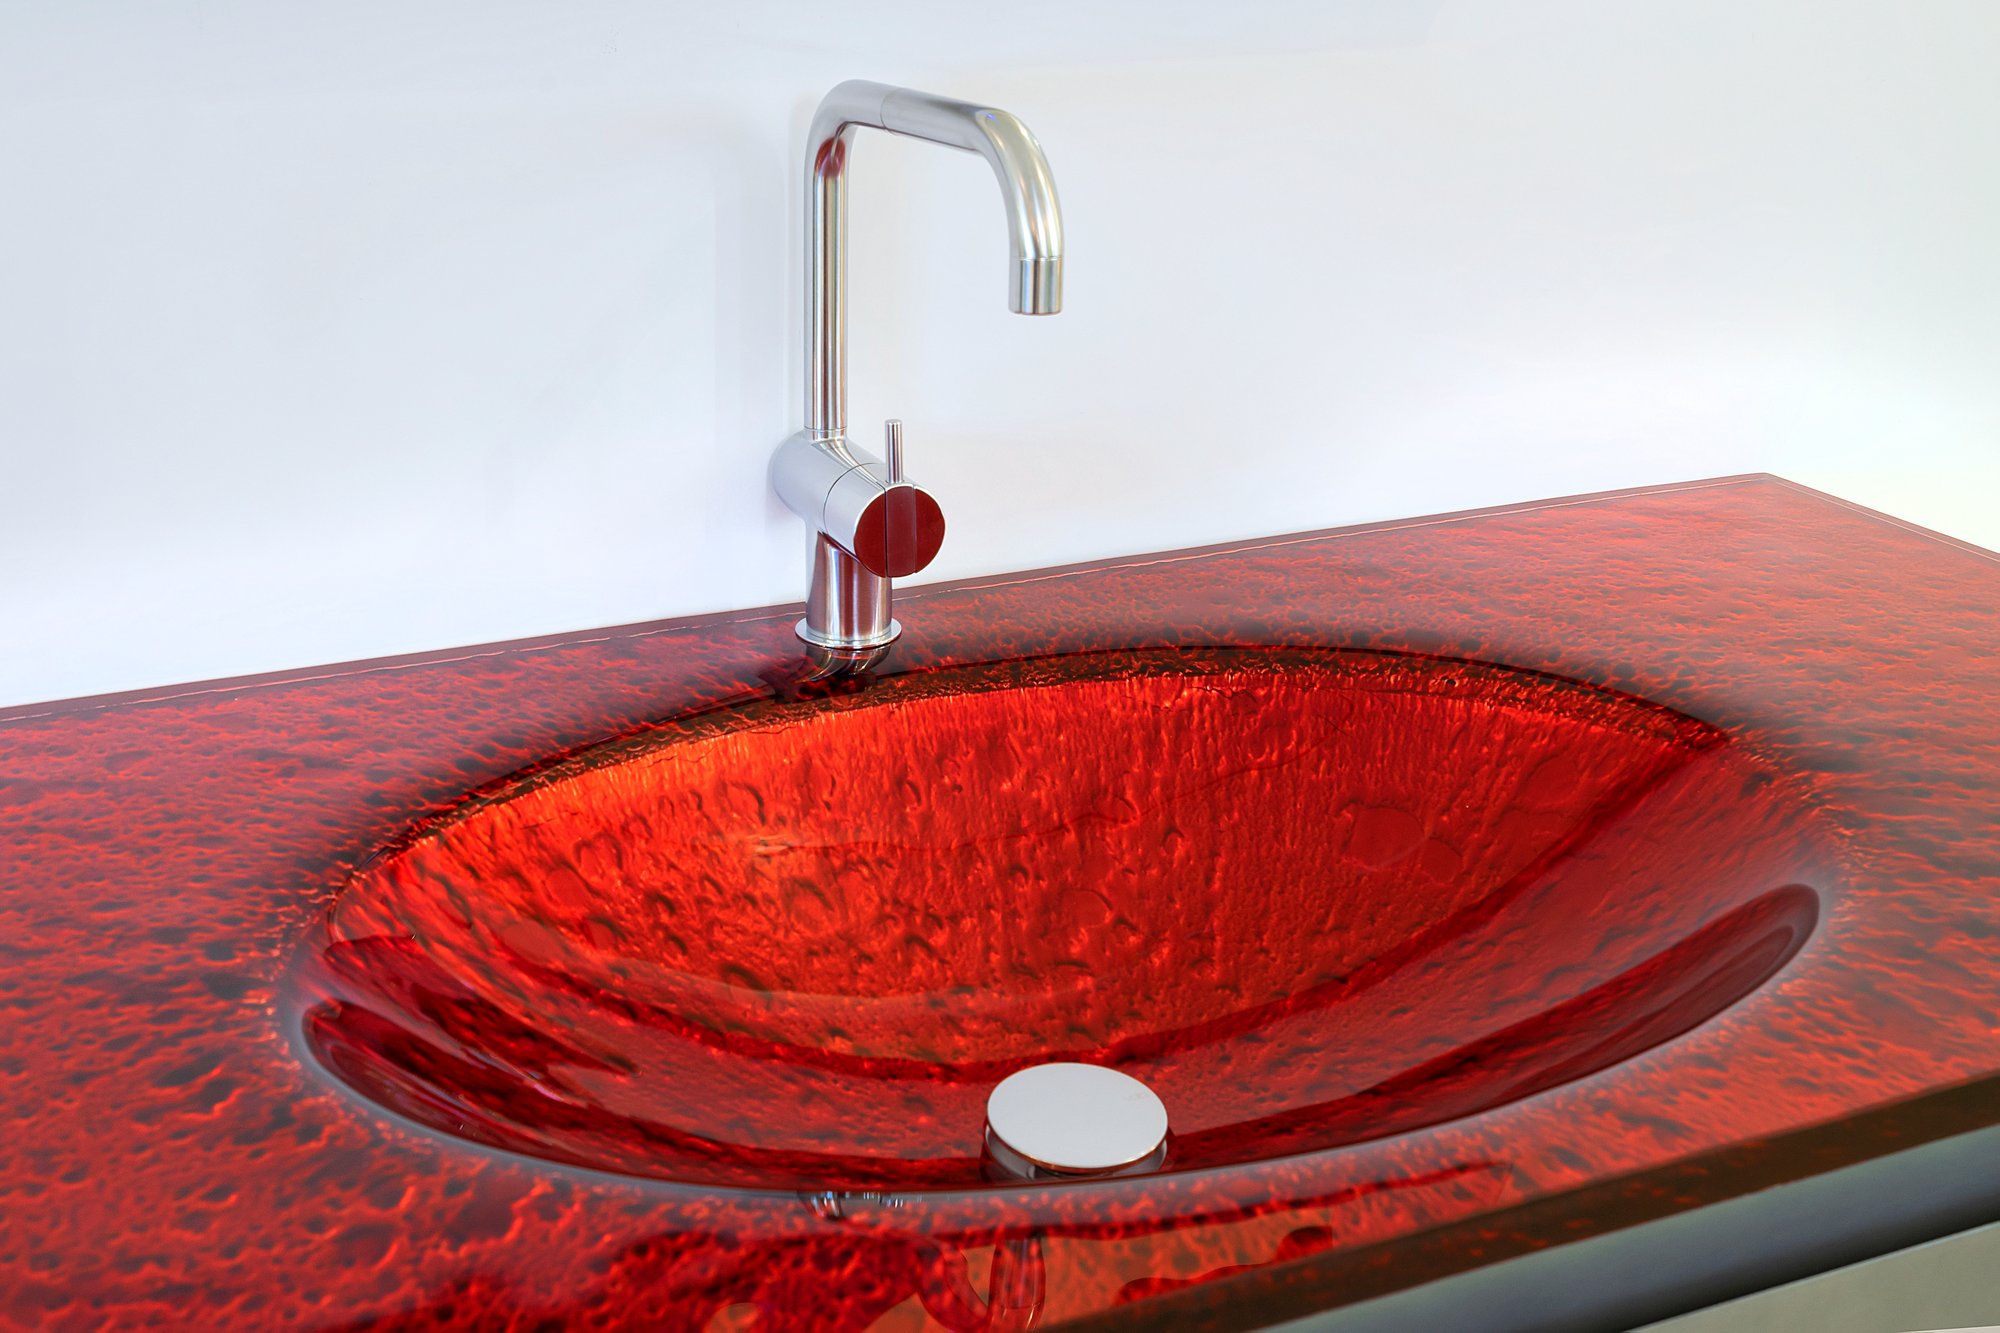 Fire-red Vetro glass countertop with an integrated glass sink